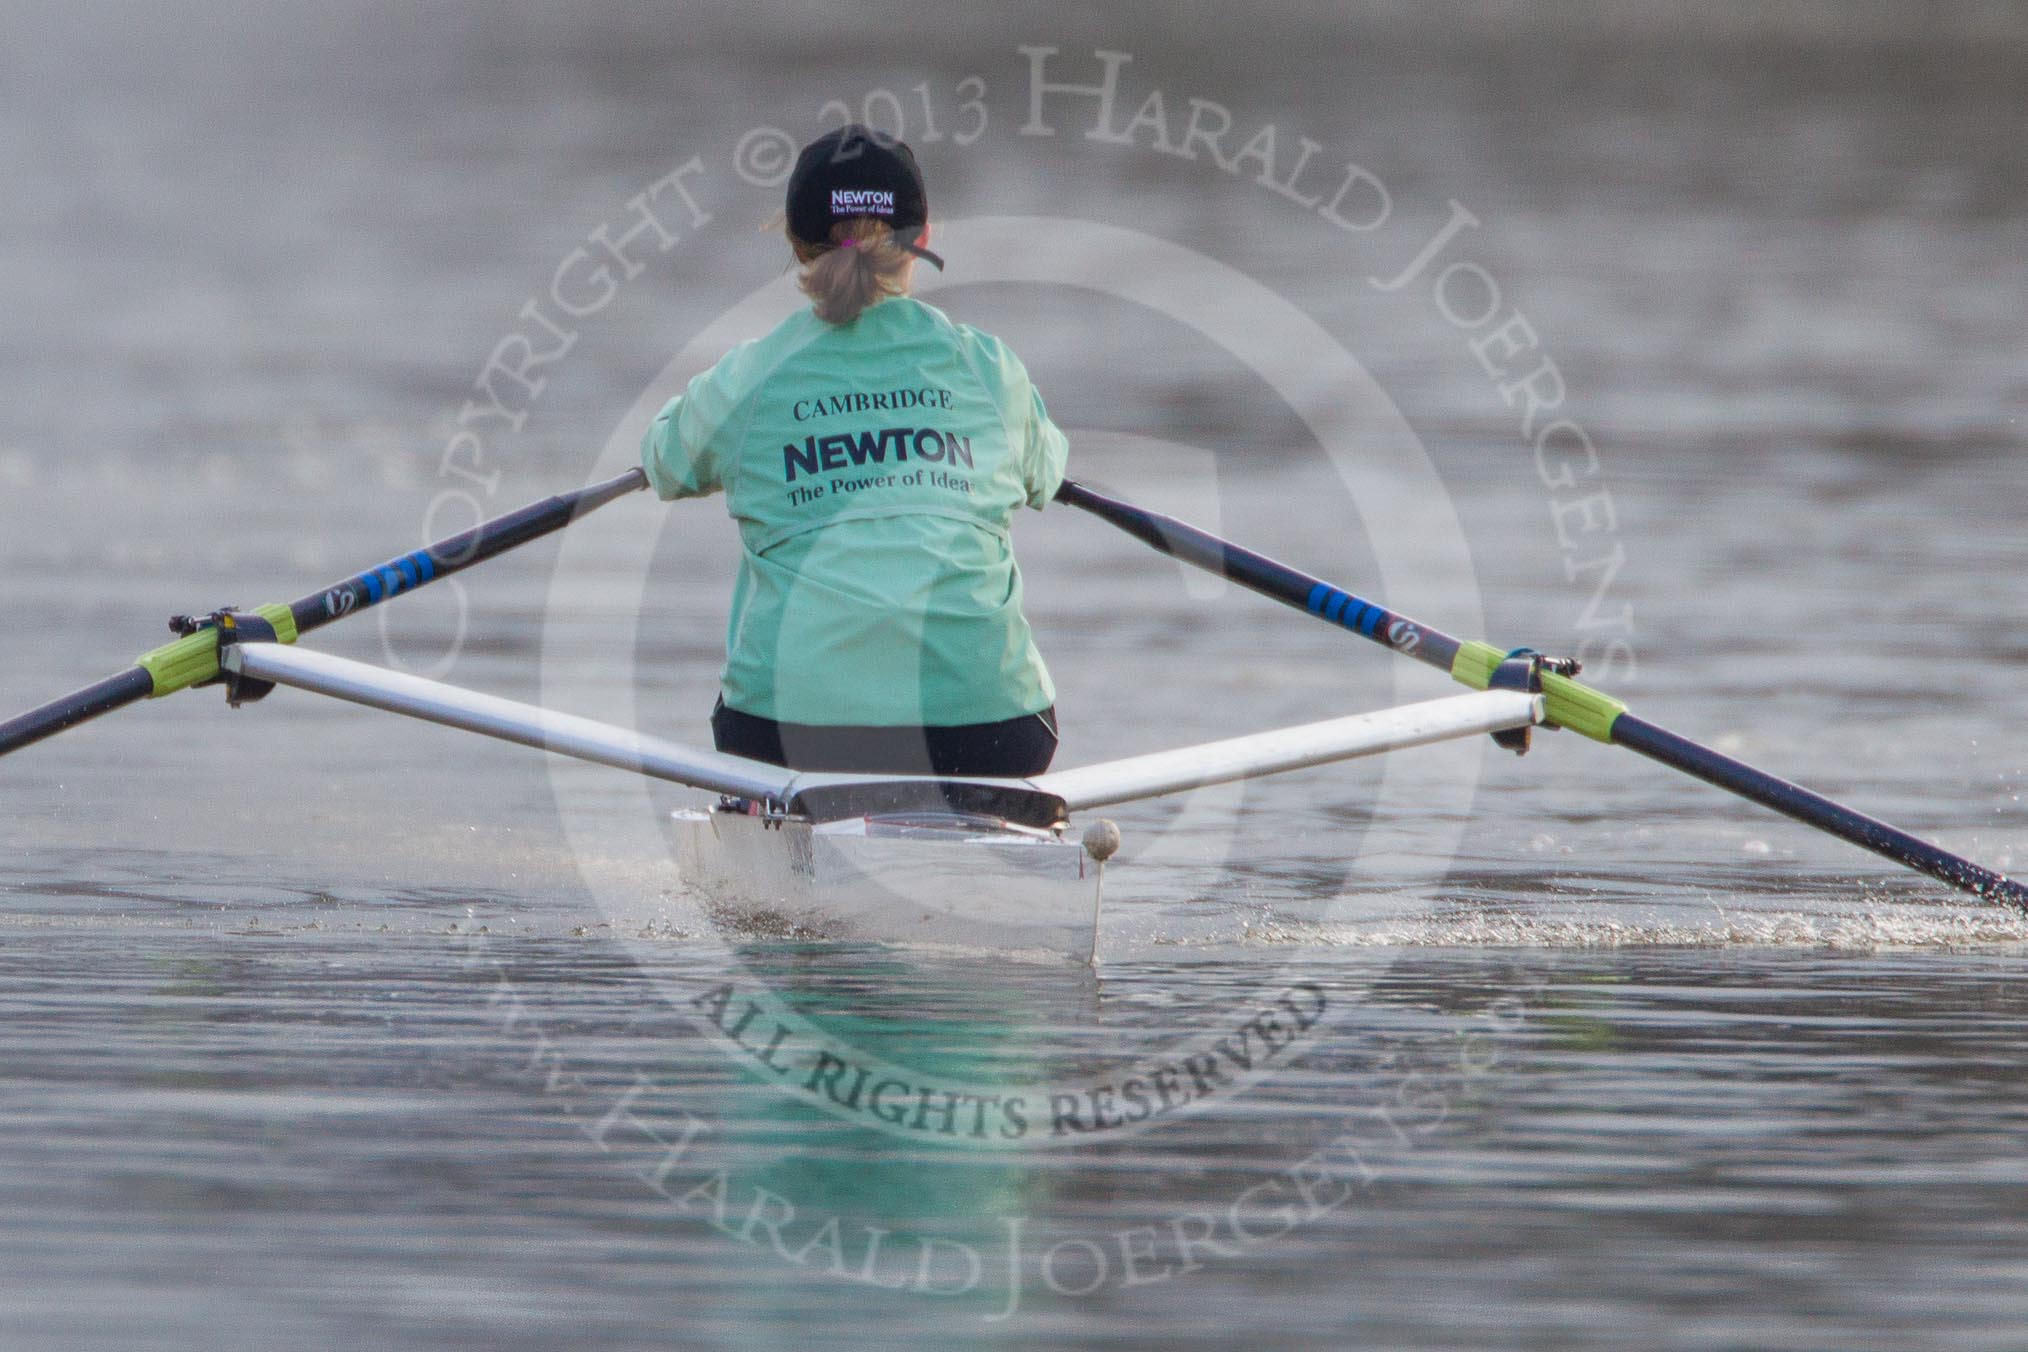 The Boat Race season 2013 - CUWBC training: Lizzy Johnstone, CUWBC substitute, rowing ahead of the three Cambridge boats..
River Thames near Remenham,
Henley-on-Thames,
Oxfordshire,
United Kingdom,
on 19 March 2013 at 16:13, image #130